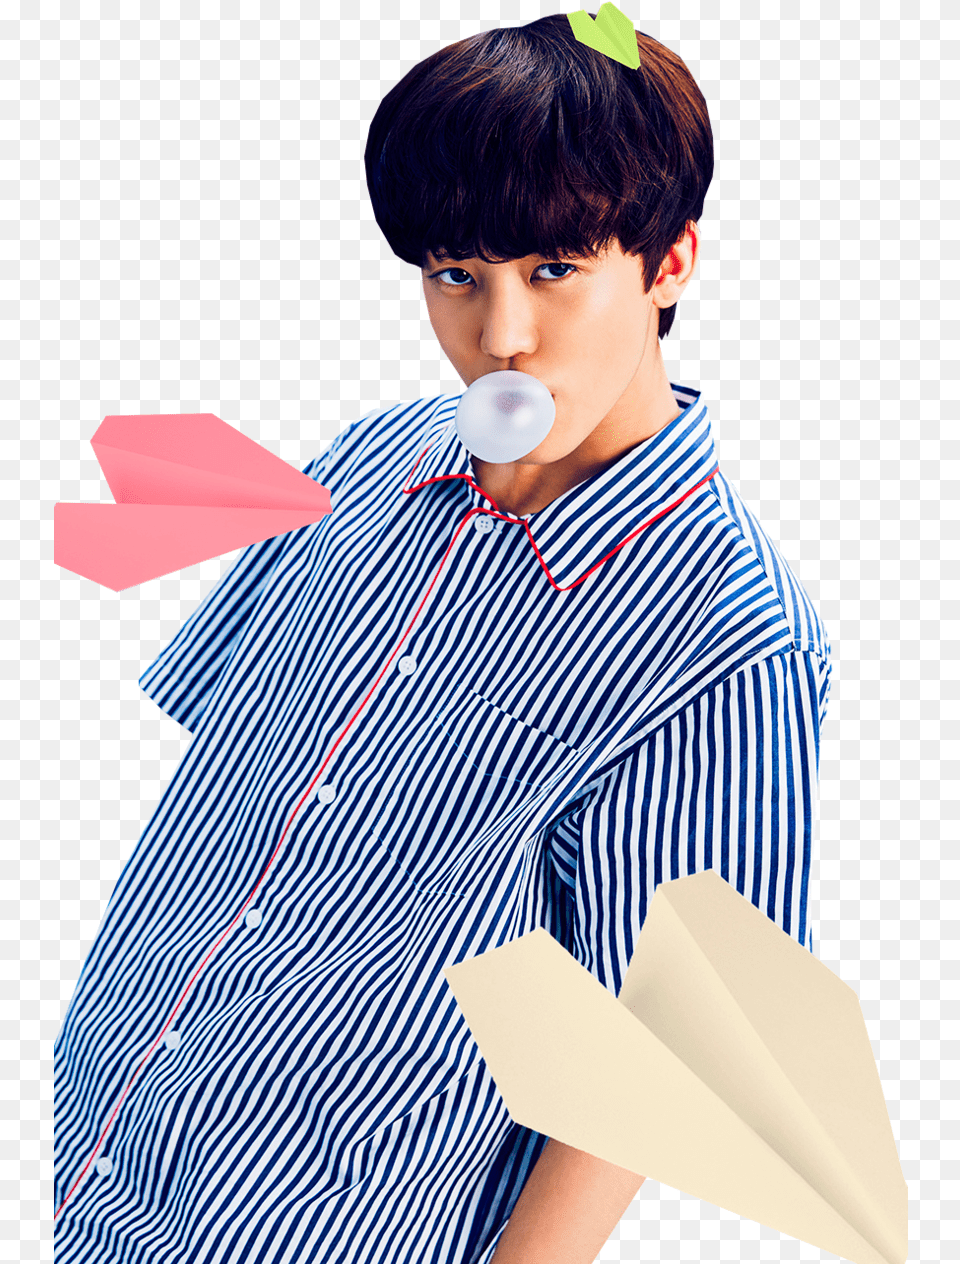 Jaemin Nct And Nct Dream Image Jaemin Nct Dream Chewing Gum, Boy, Child, Male, Person Free Png